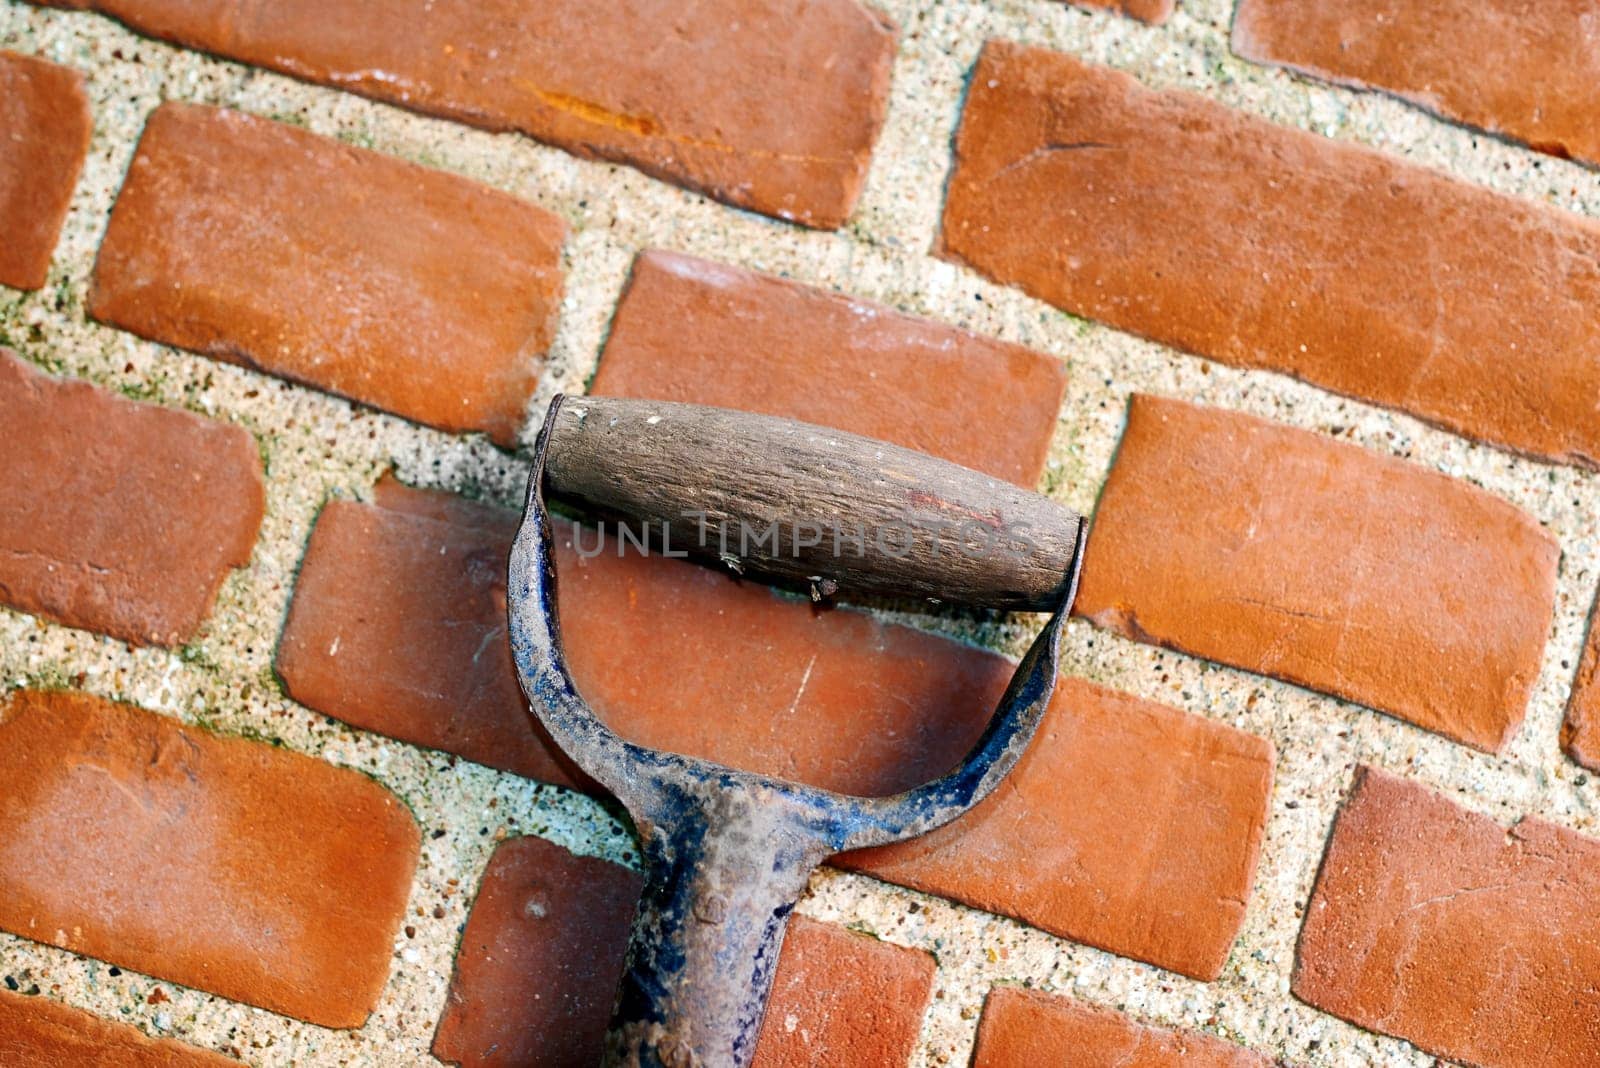 Brick, wall and cement with handle of spade for gardening, outside and block with concrete for home build. Masonry, brickwork and weather for outdoor stone architecture, weathered and aged material.